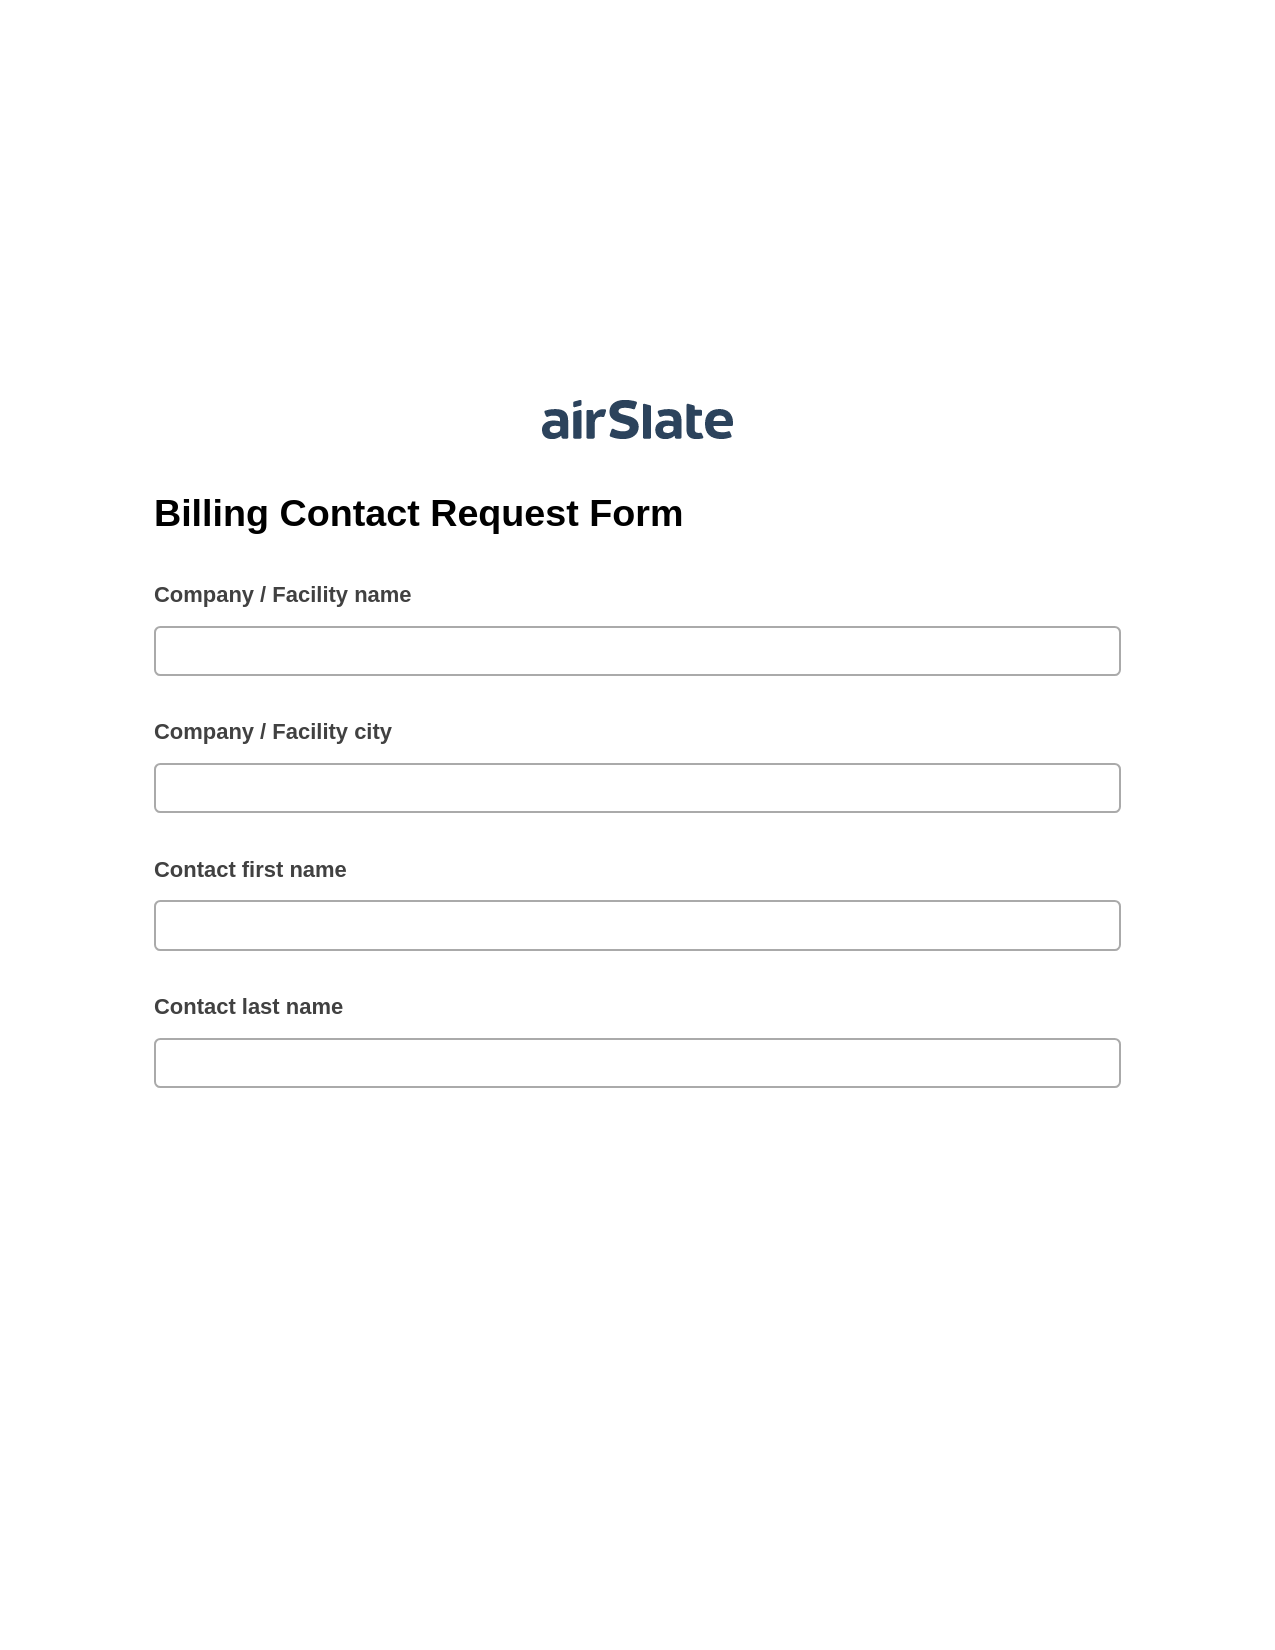 Billing Contact Request Form Pre-fill from Salesforce Records with SOQL Bot, Export to MS Dynamics 365 Bot, Export to Excel 365 Bot